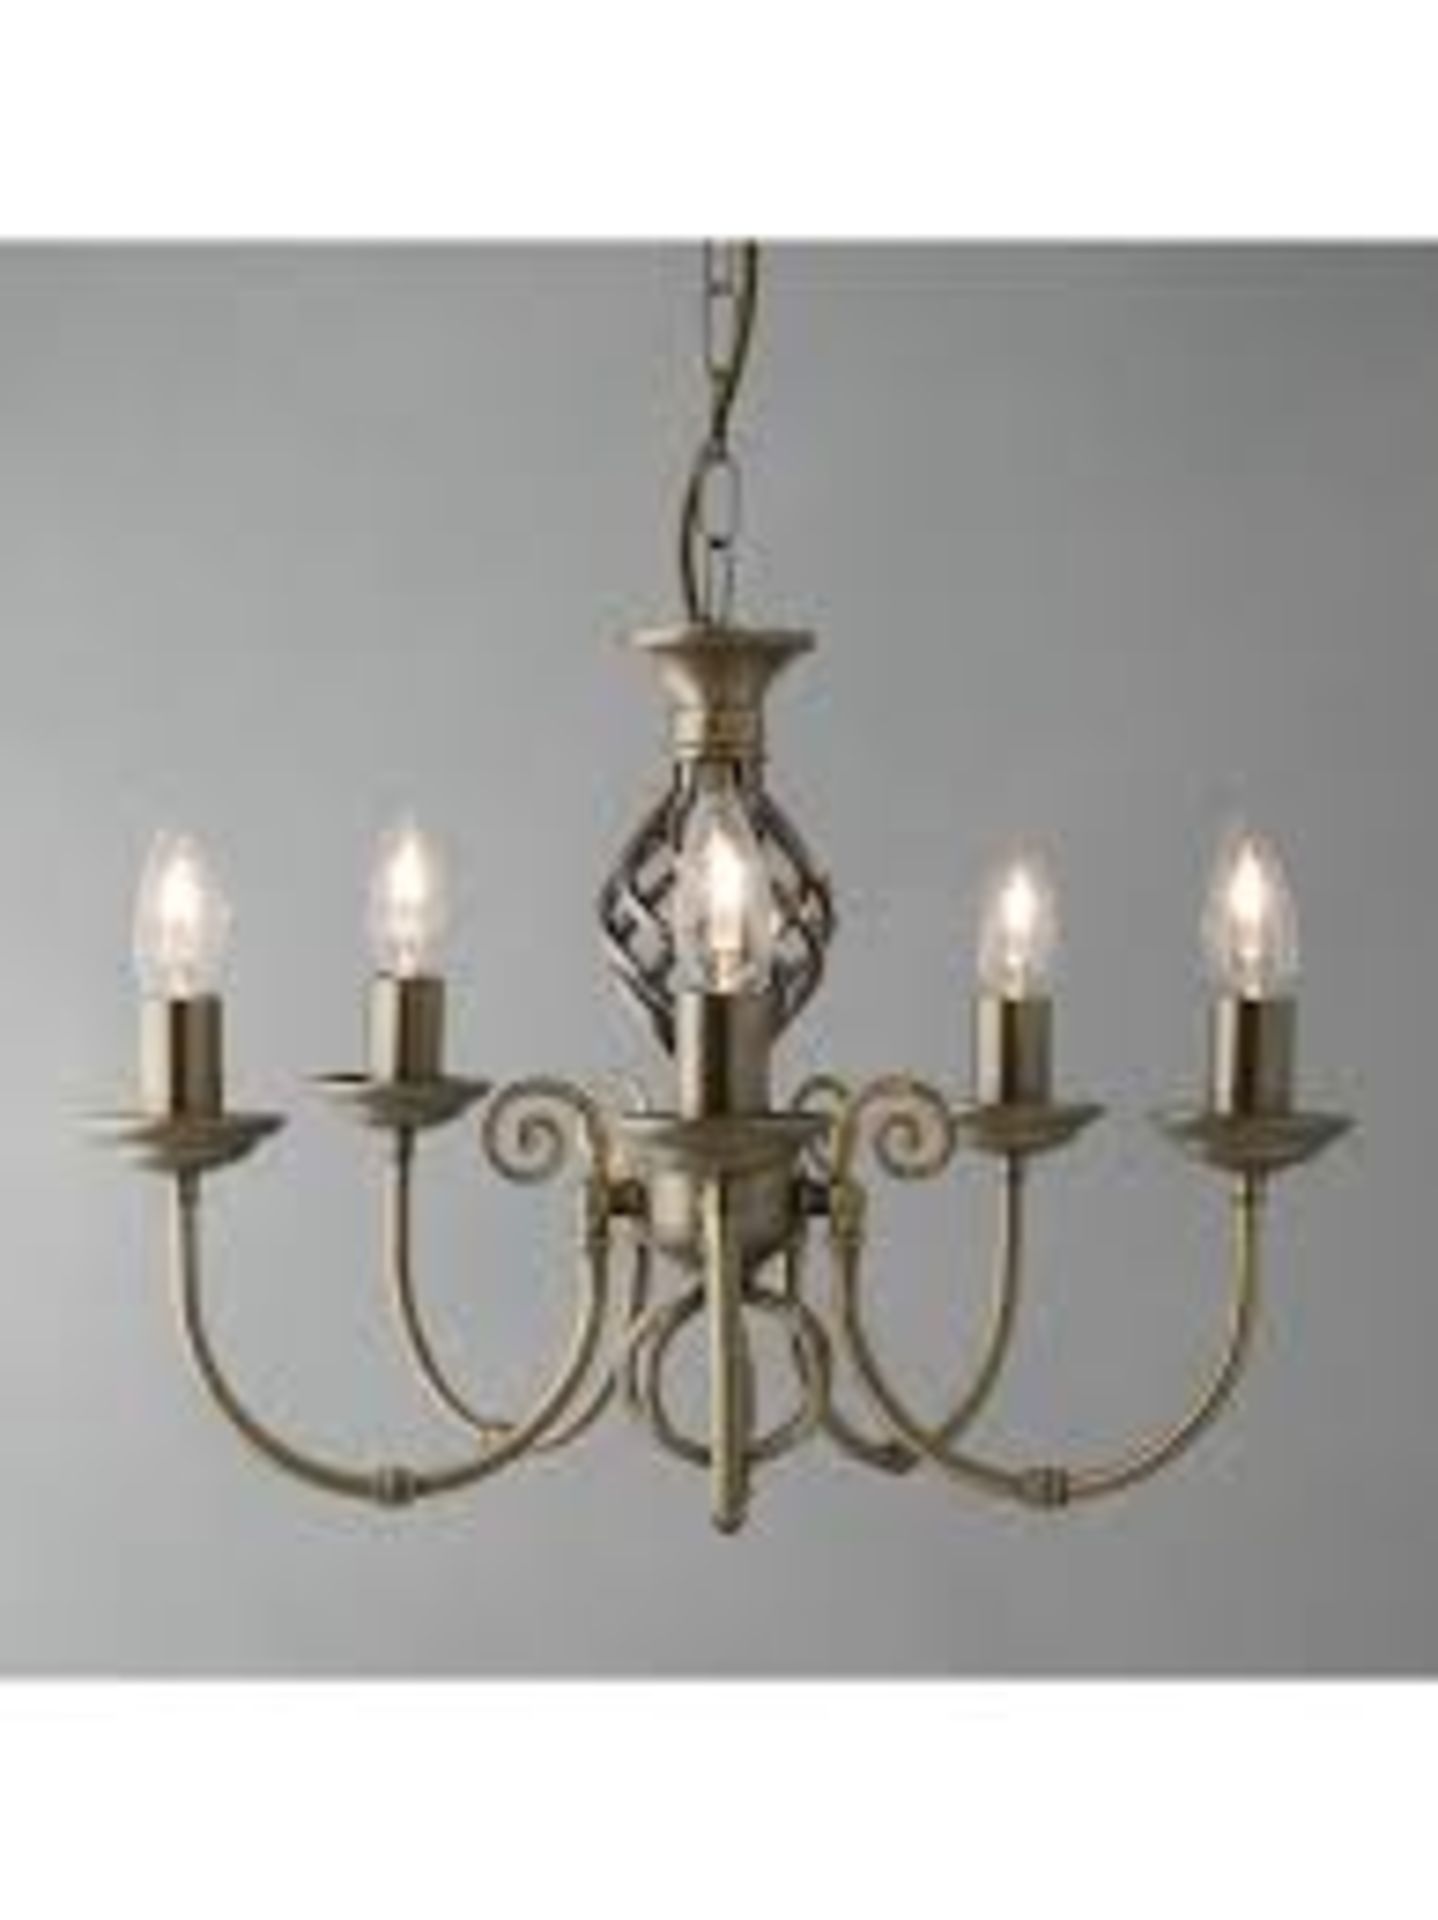 Boxed Malik 5 Light Ceiling Light Fitting In Antique Brass Finish RRP £110 (2310915) (Viewings And